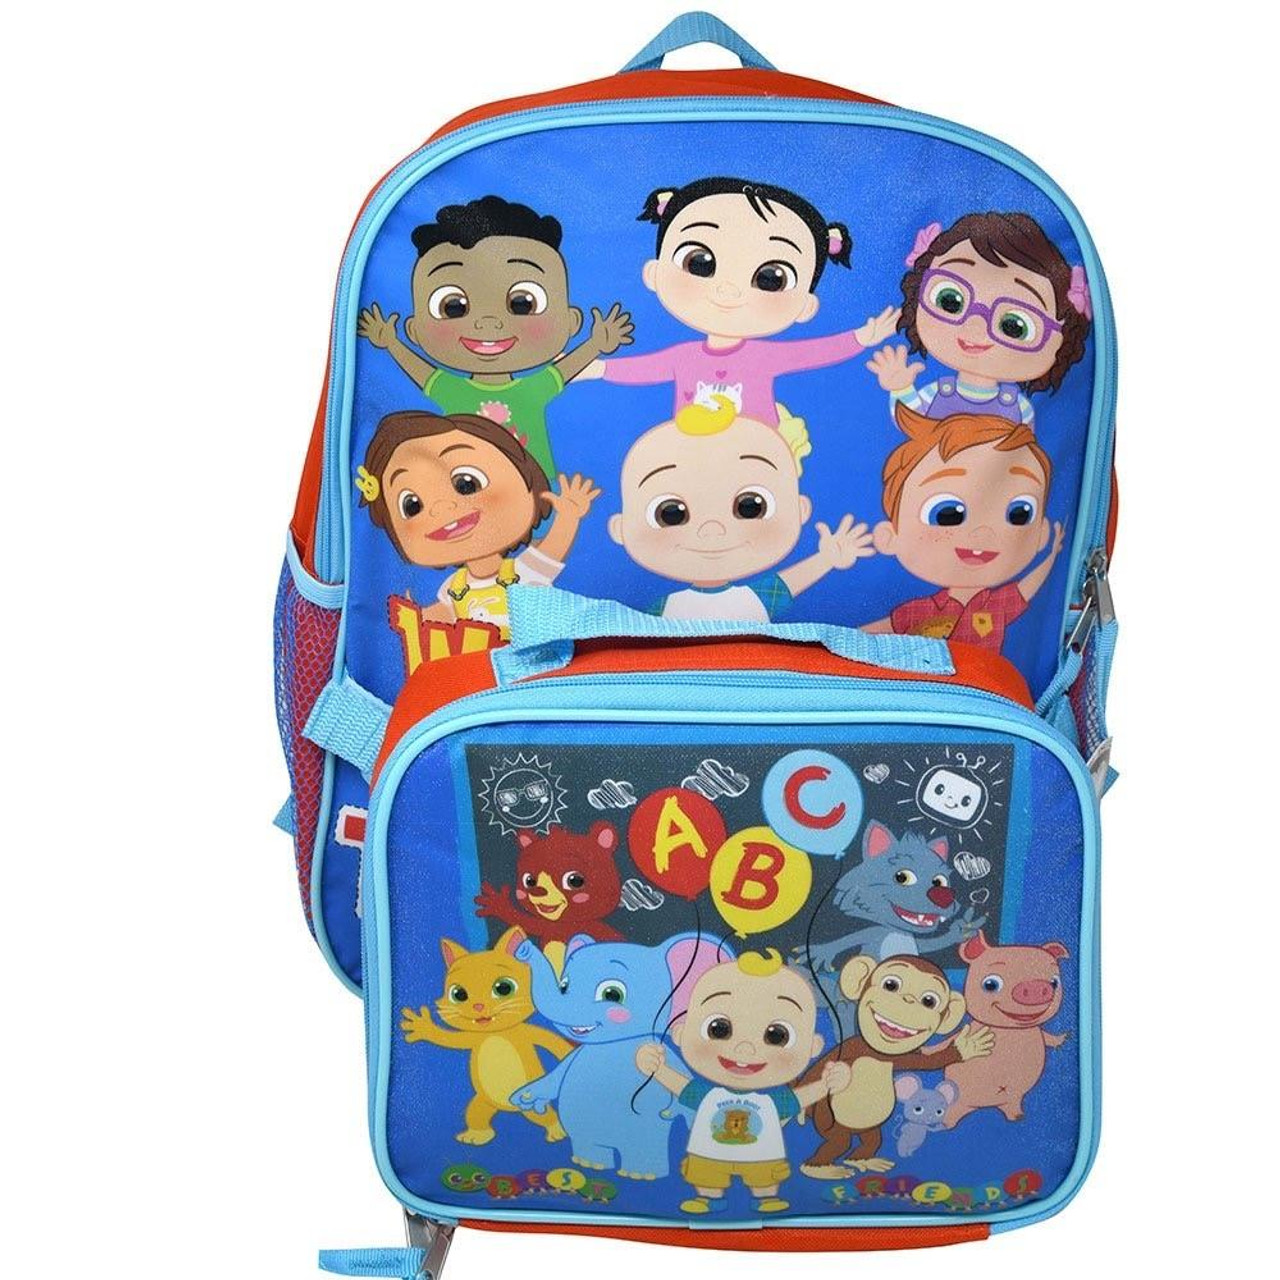 https://cdn11.bigcommerce.com/s-31ycg3ui3f/images/stencil/1280x1280/products/1394/4385/Cocomelong_Backpack_with_Lunch_Bag_Blue__24186.1659039713.jpg?c=1